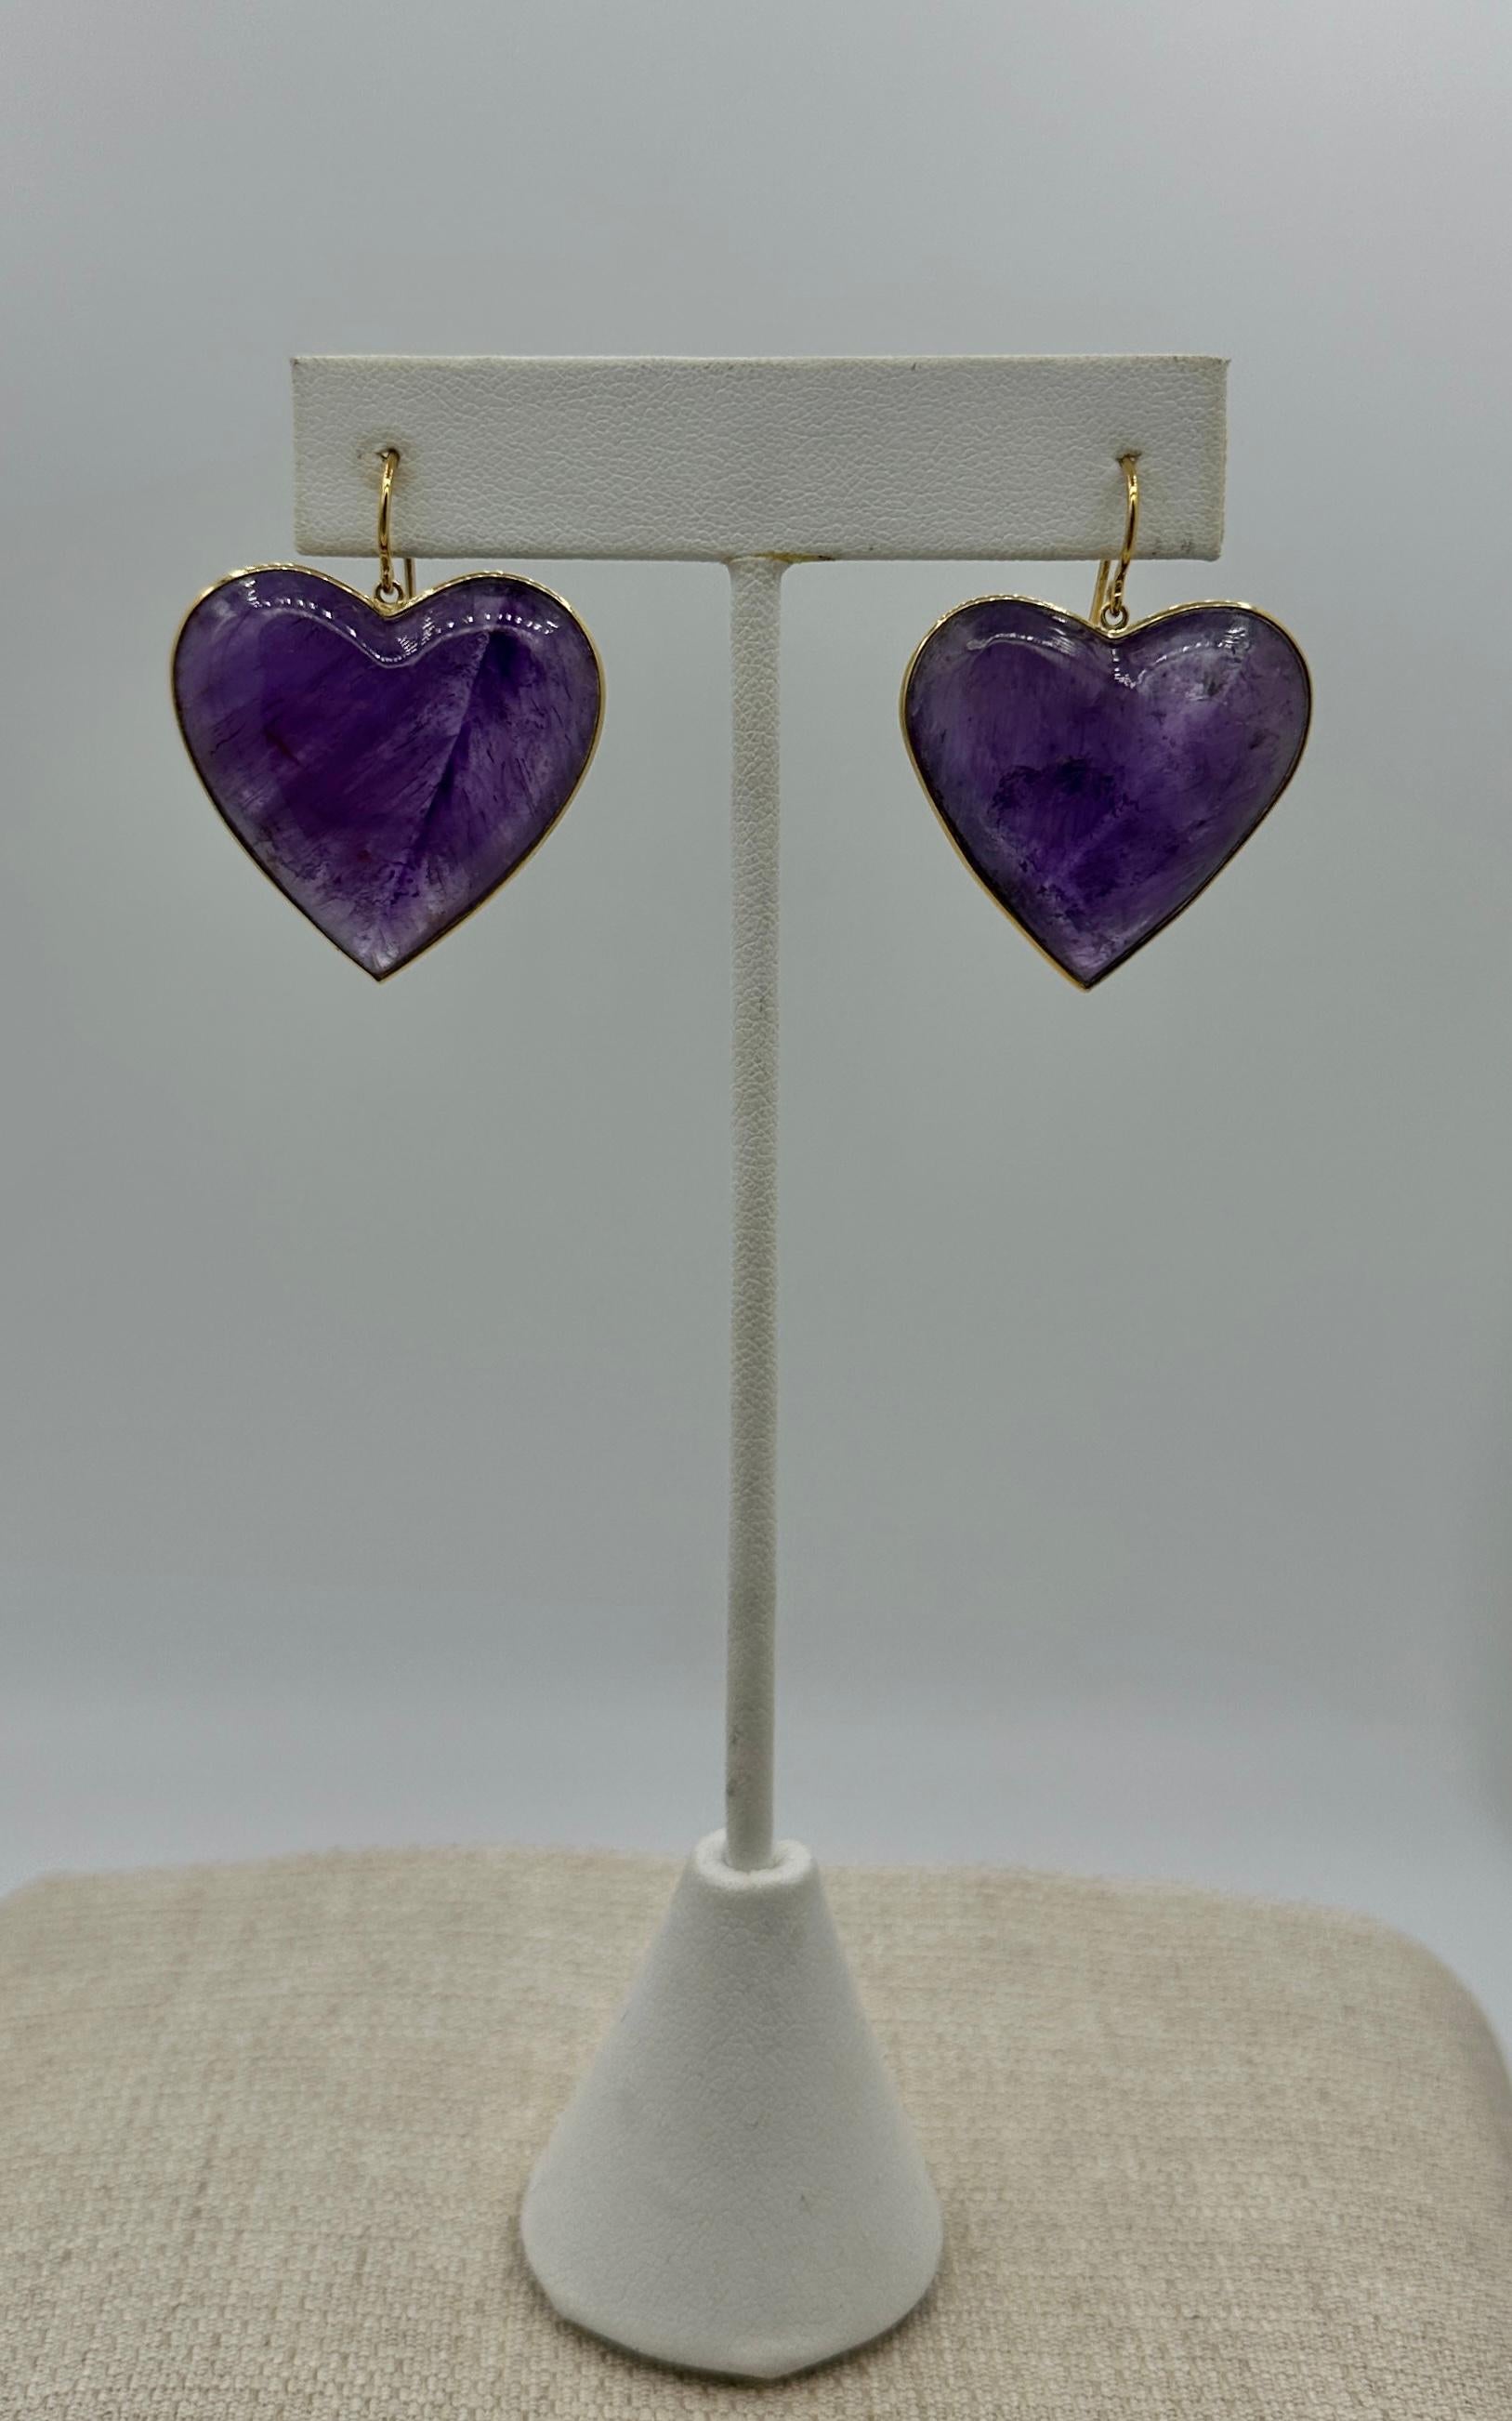 Amethyst Rose Quartz Heart Necklace and Earrings 14 Karat Gold Ms. Daves Estate For Sale 2